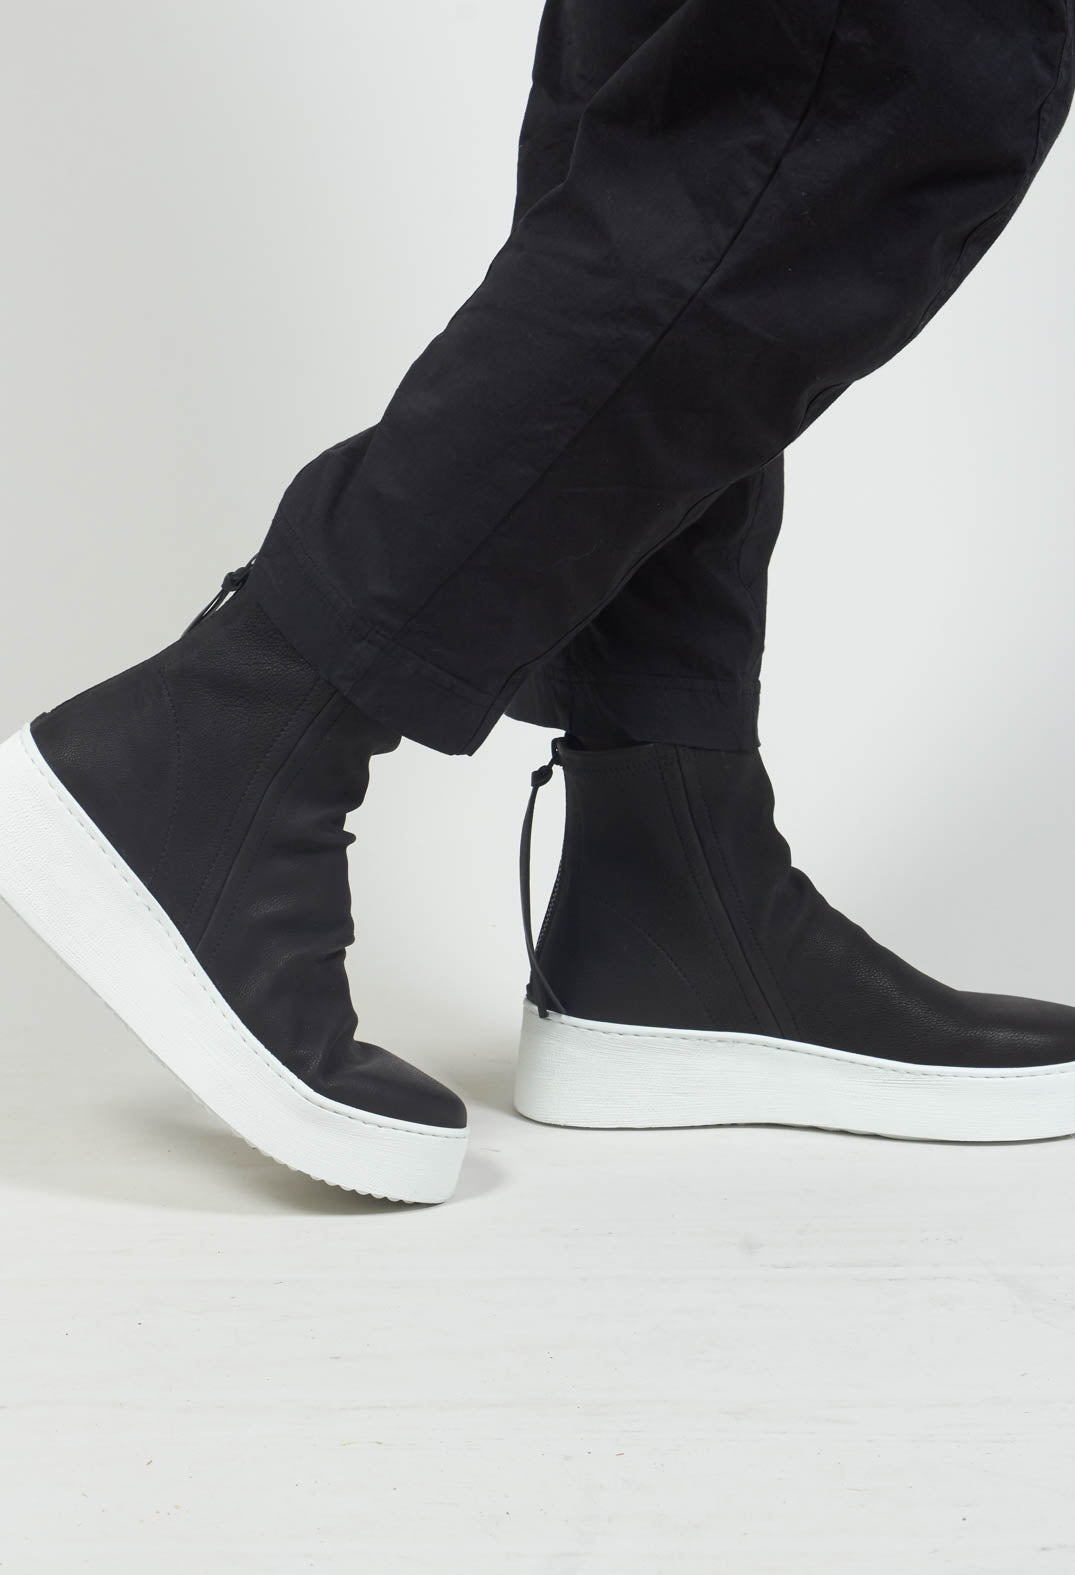 Ankle Height Chunky Shoe in Black and White